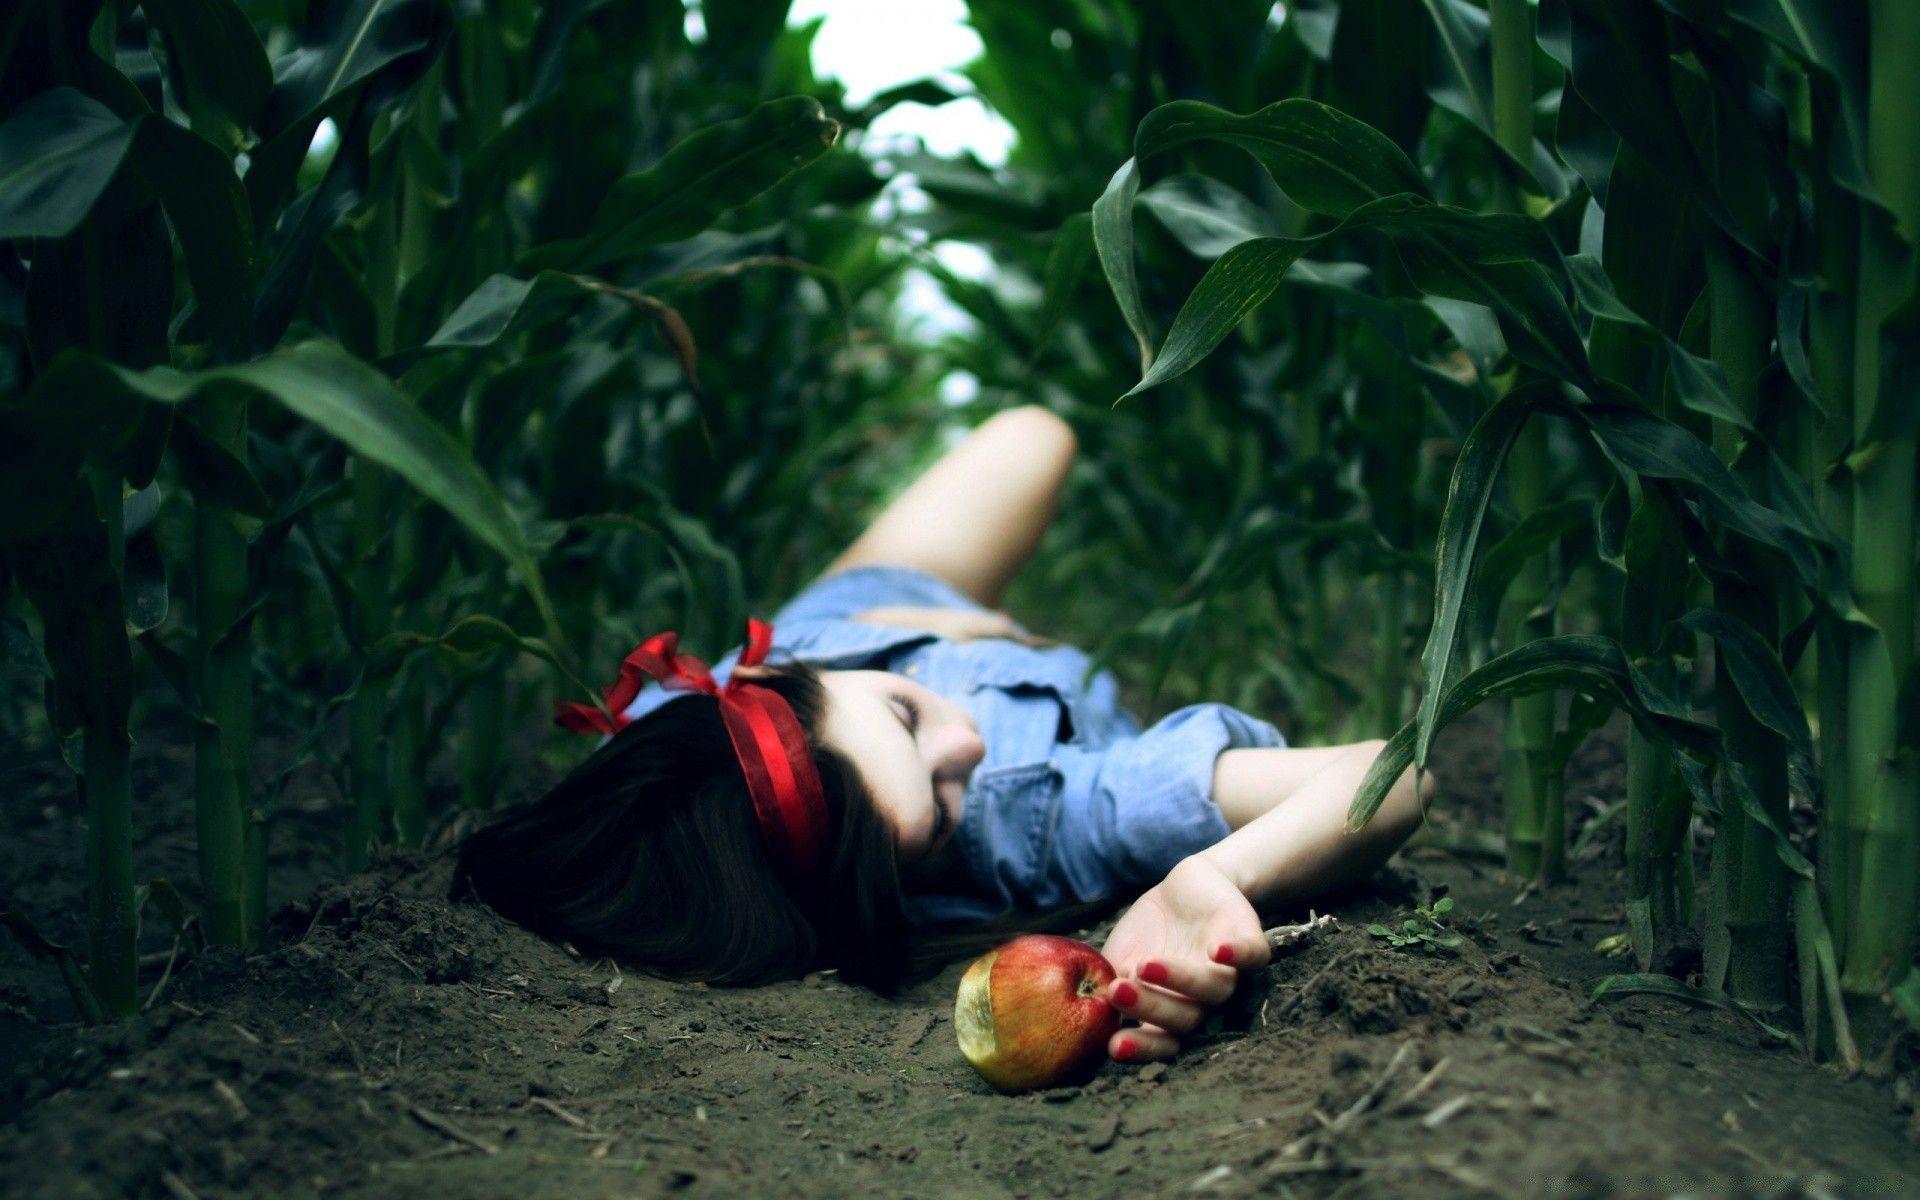 Snow White And The Poison Apple. iPhone wallpaper for free